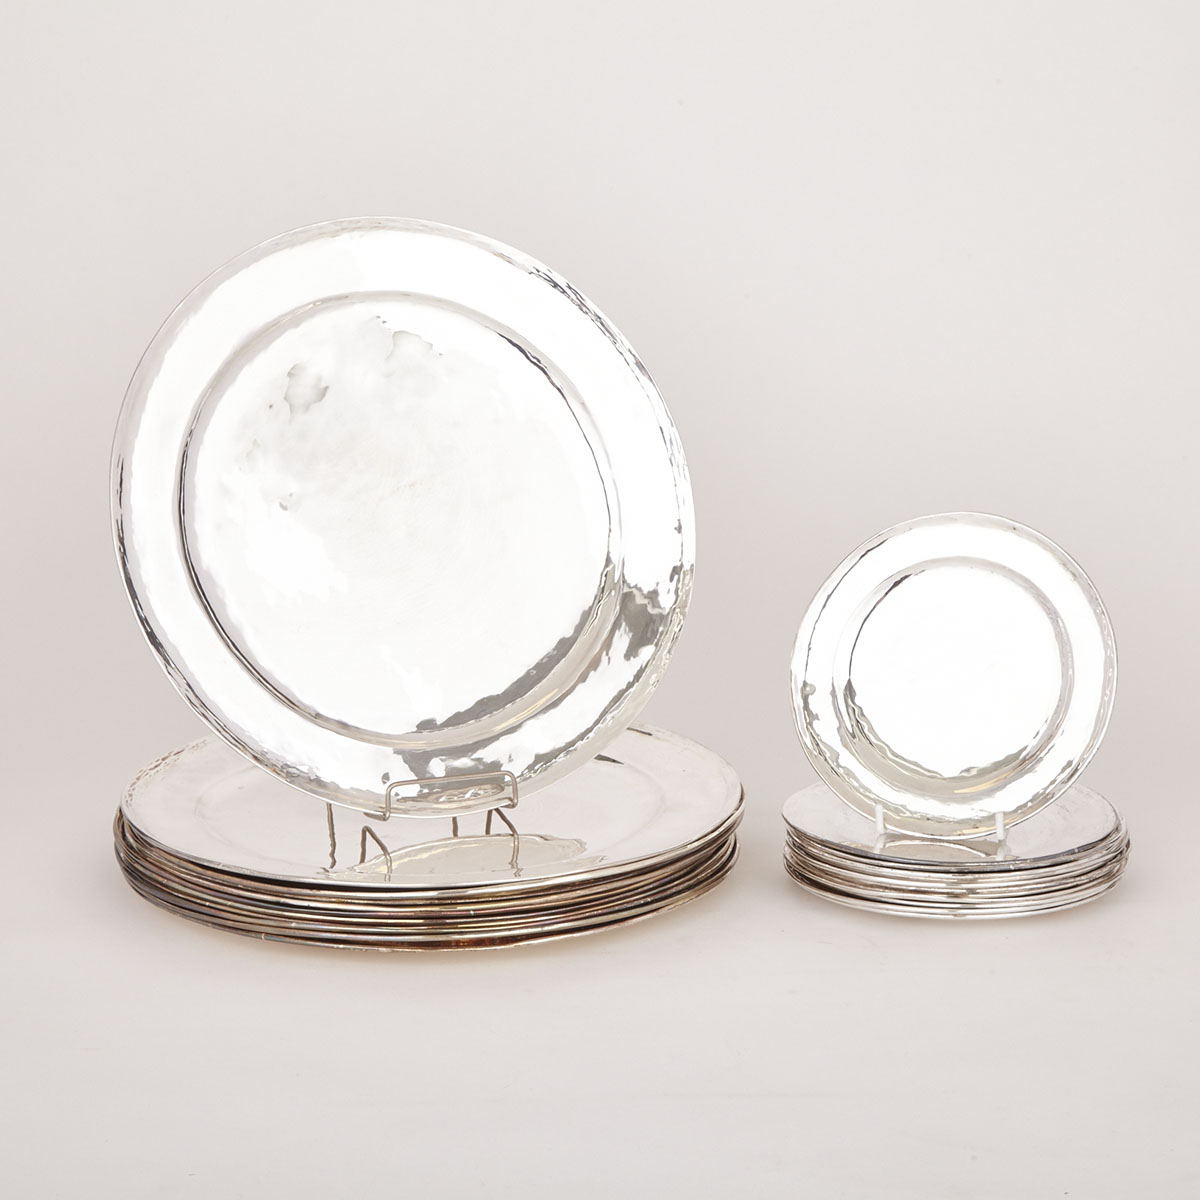 Eleven Peruvian Silver Service Plates and Twelve Side Plates, 20th century